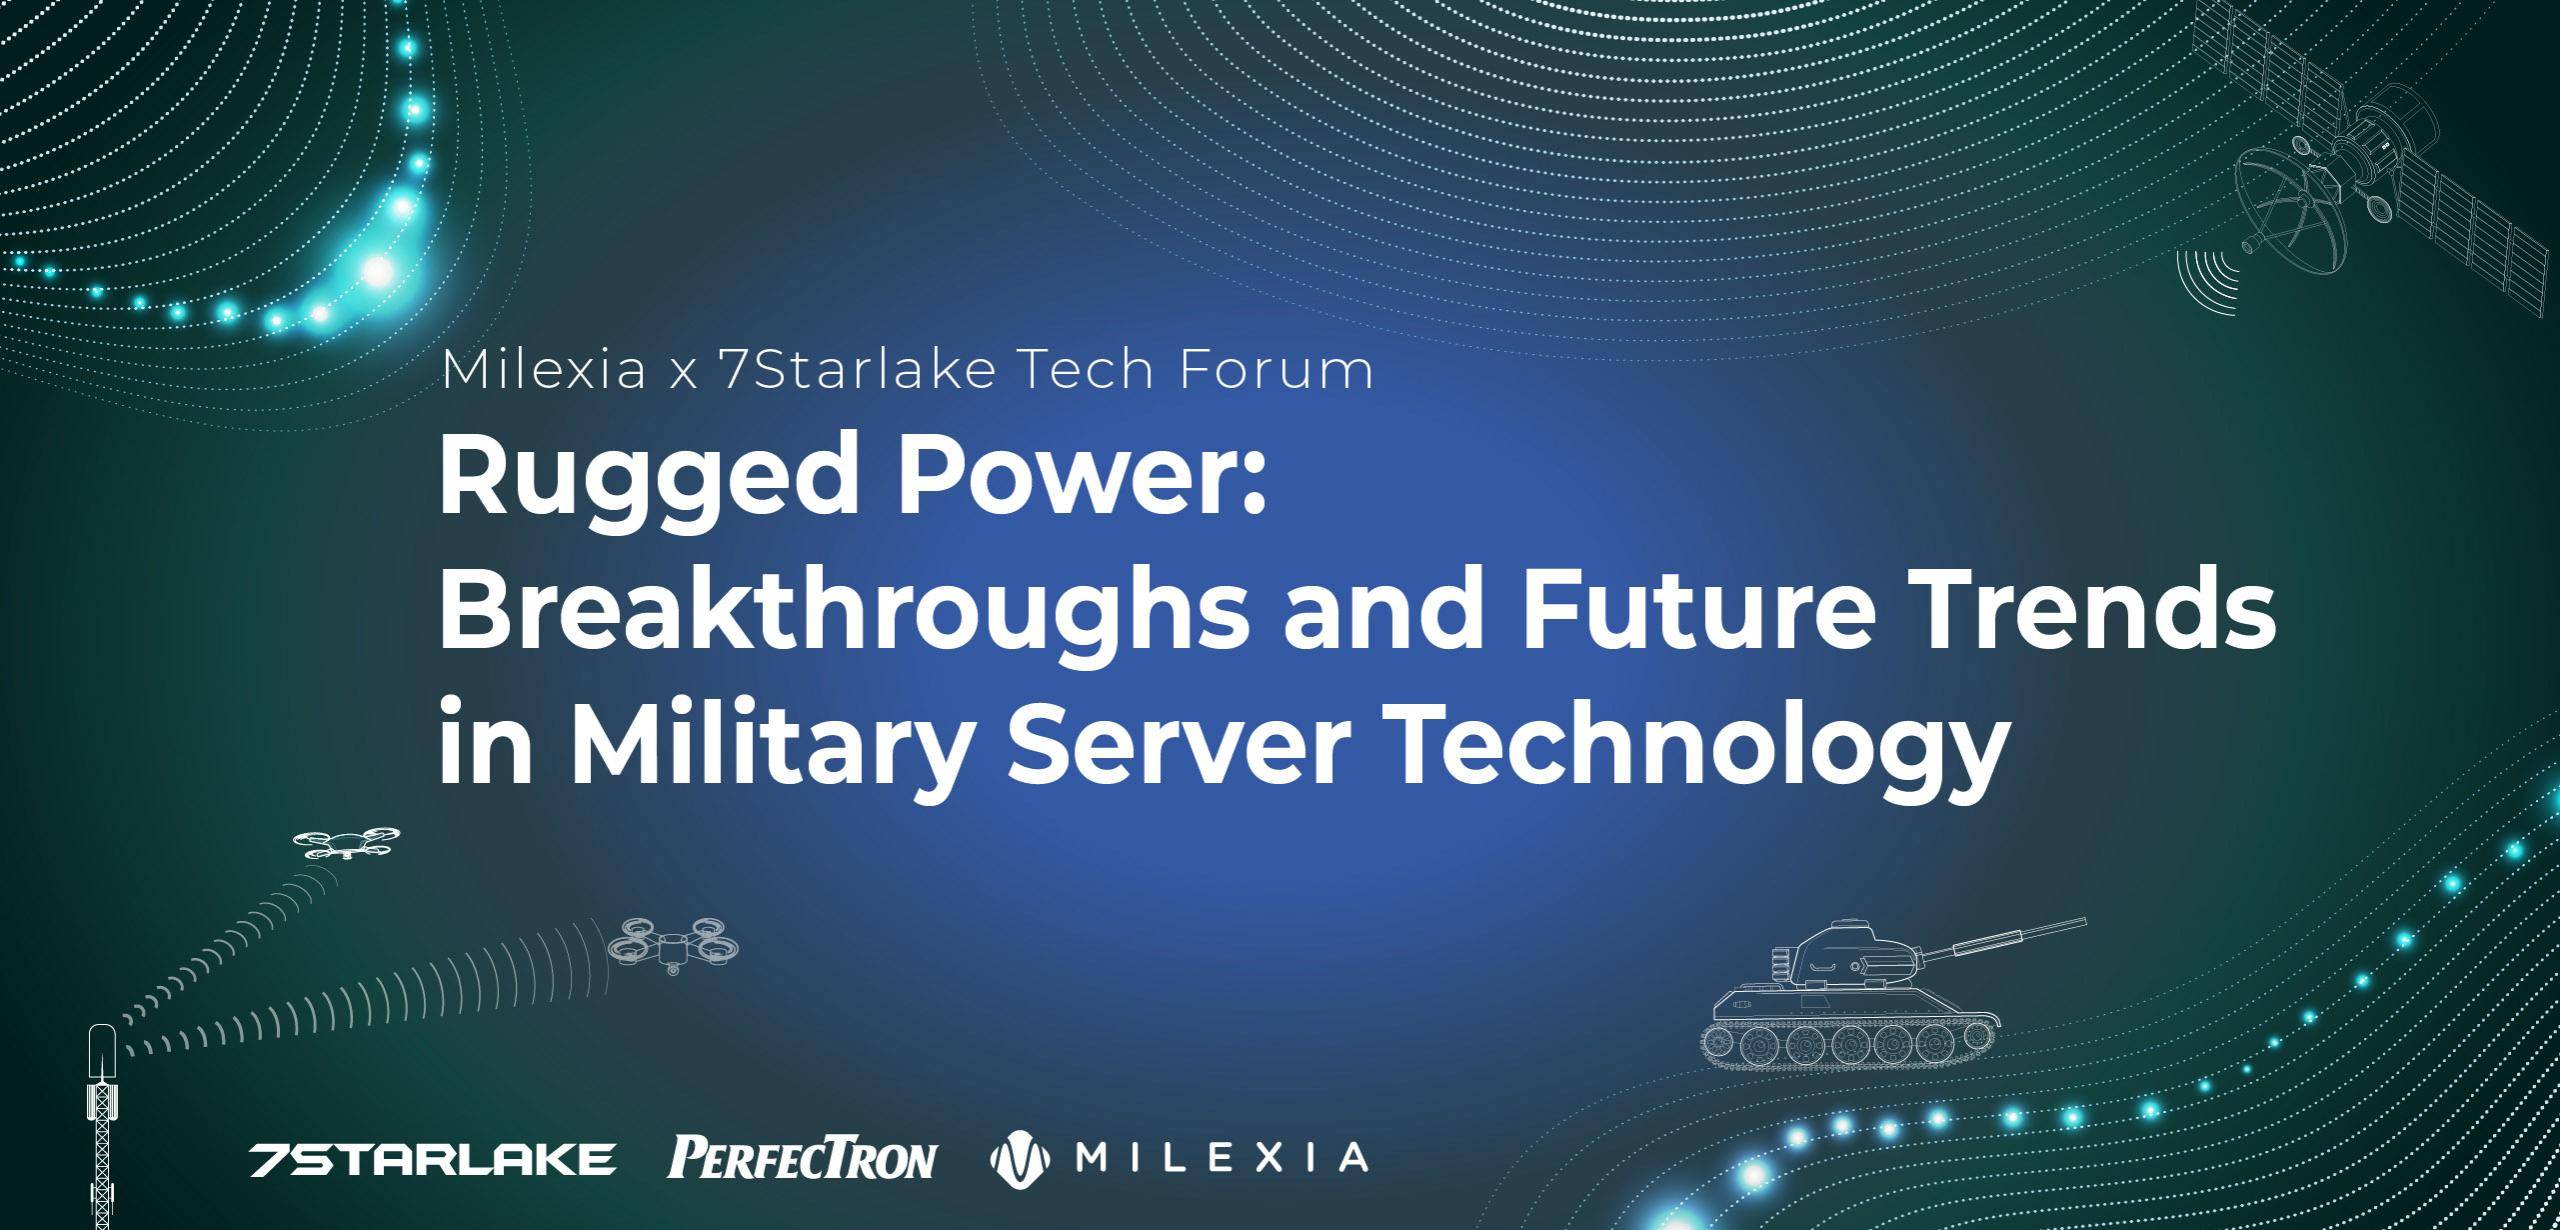 Rugged Power:  Breakthroughs and Future Trends in Military Server Technology